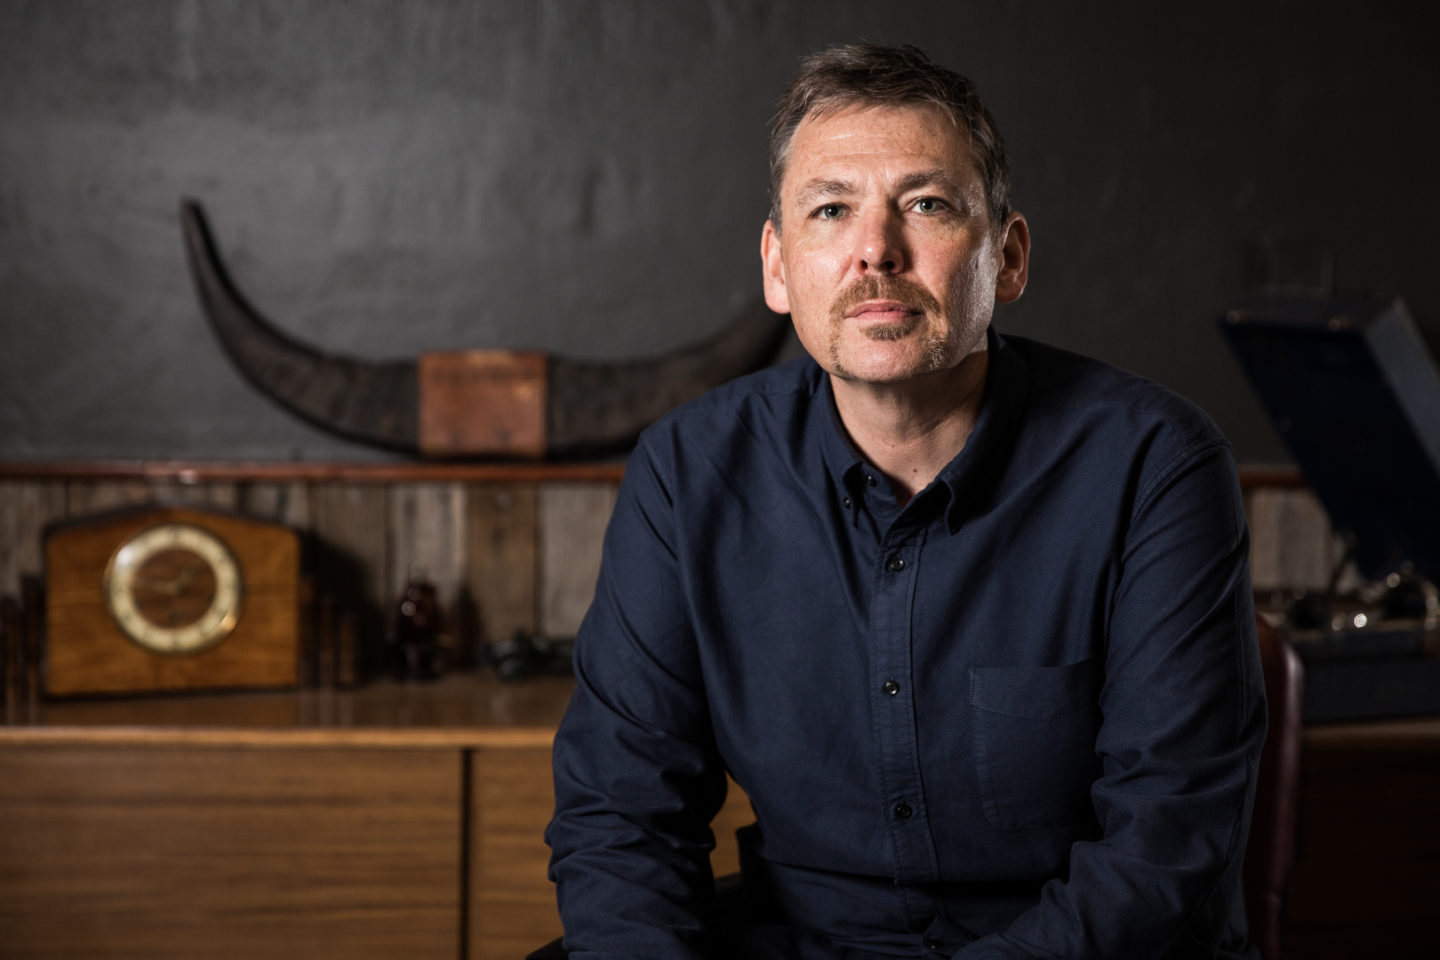 “We only partner with research organisations willing to share their learning and knowledge” Owen Sharp, MOVEMBER’s CEO